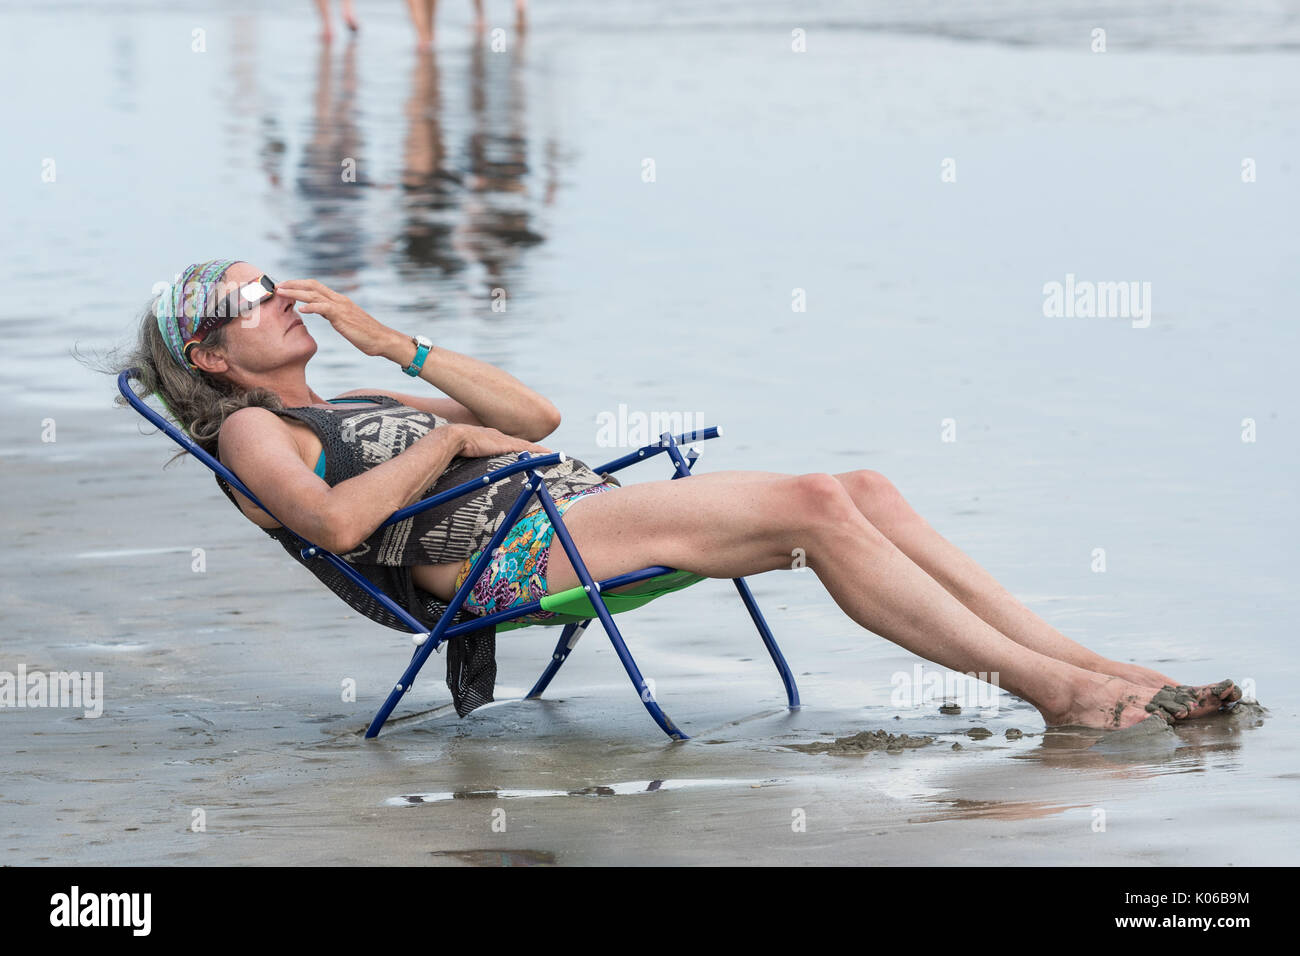 Charleston, Isle of Palms, USA. 21st Aug, 2017. A woman relaxes in a beach chair as she view the total solar eclipse over the beach outside Charleston August 21, 2017 in Isle of Palms, South Carolina. The solar eclipse after sweeping across the nation crosses the Charleston area before heading over the Atlantic Ocean. Credit: Planetpix/Alamy Live News Stock Photo